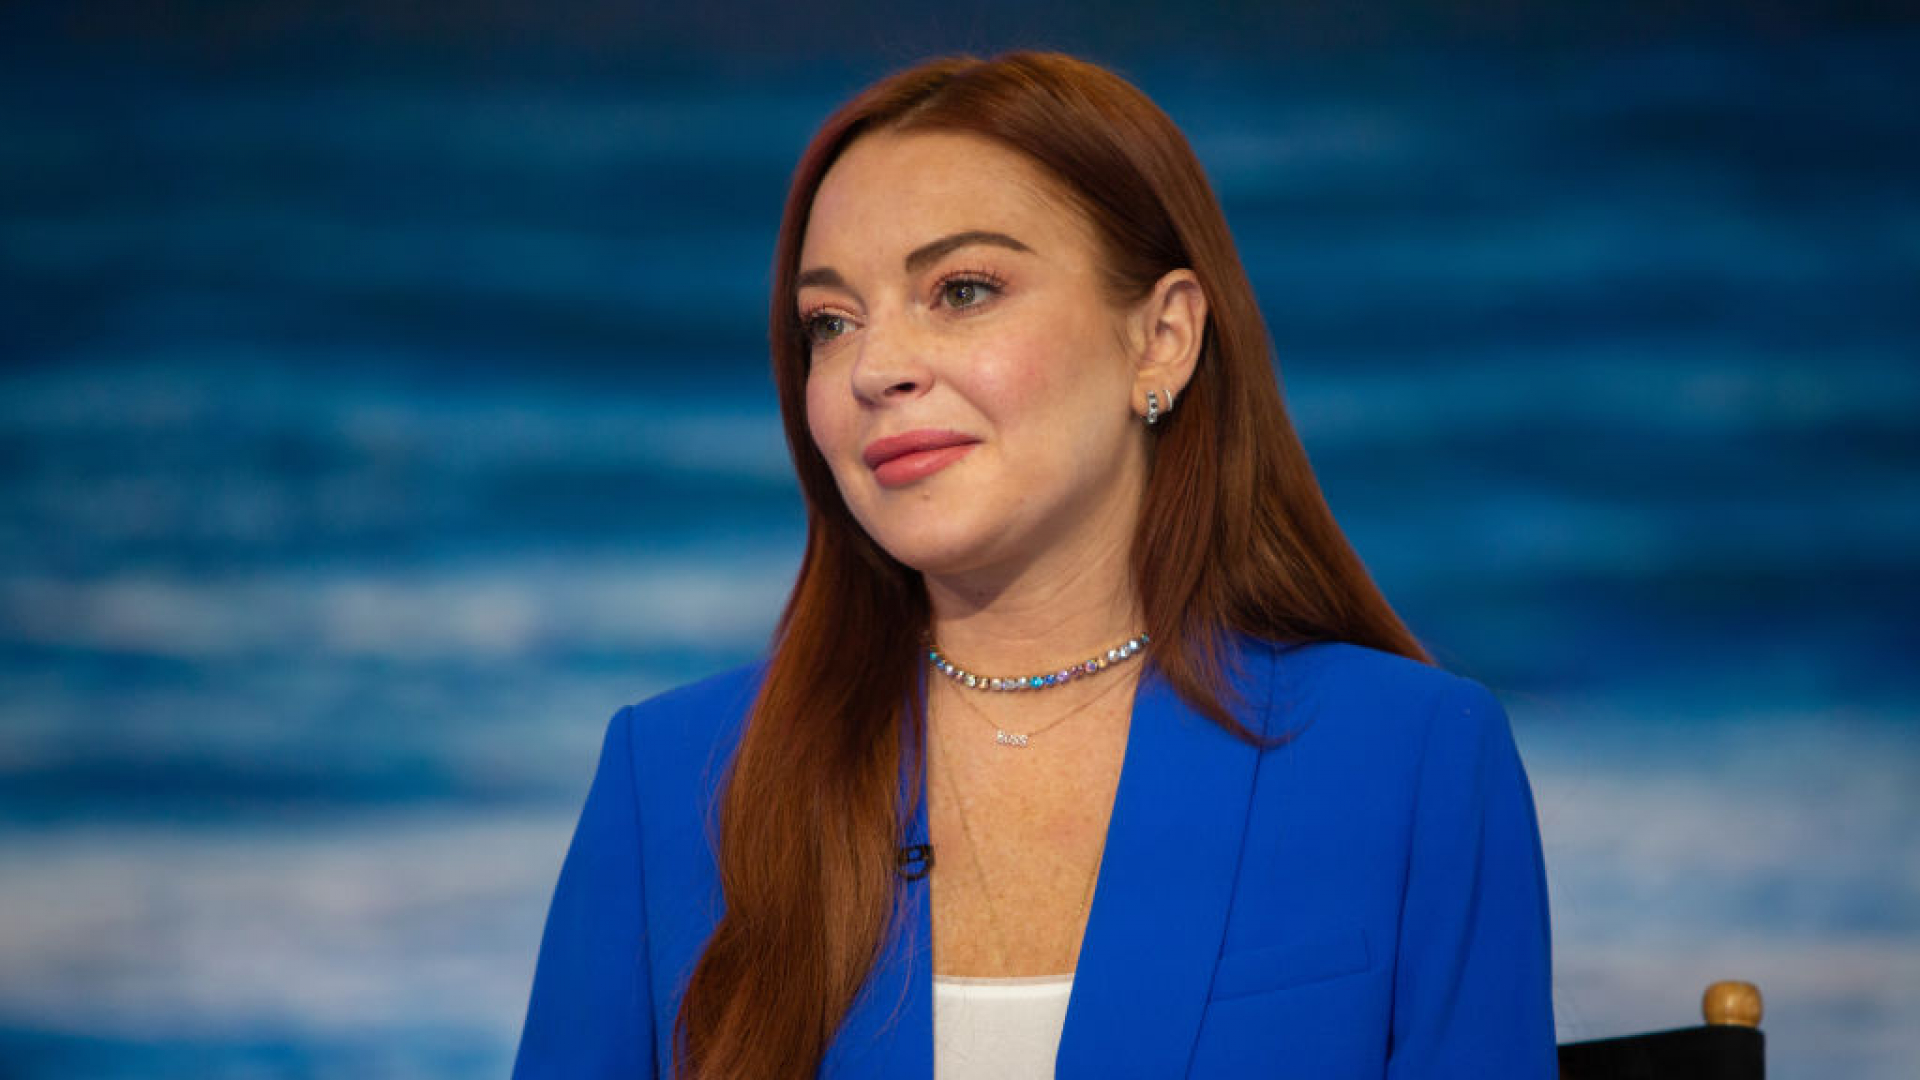 Lindsay Lohan Has Just Signed A Major Film Deal With Netflix 2213